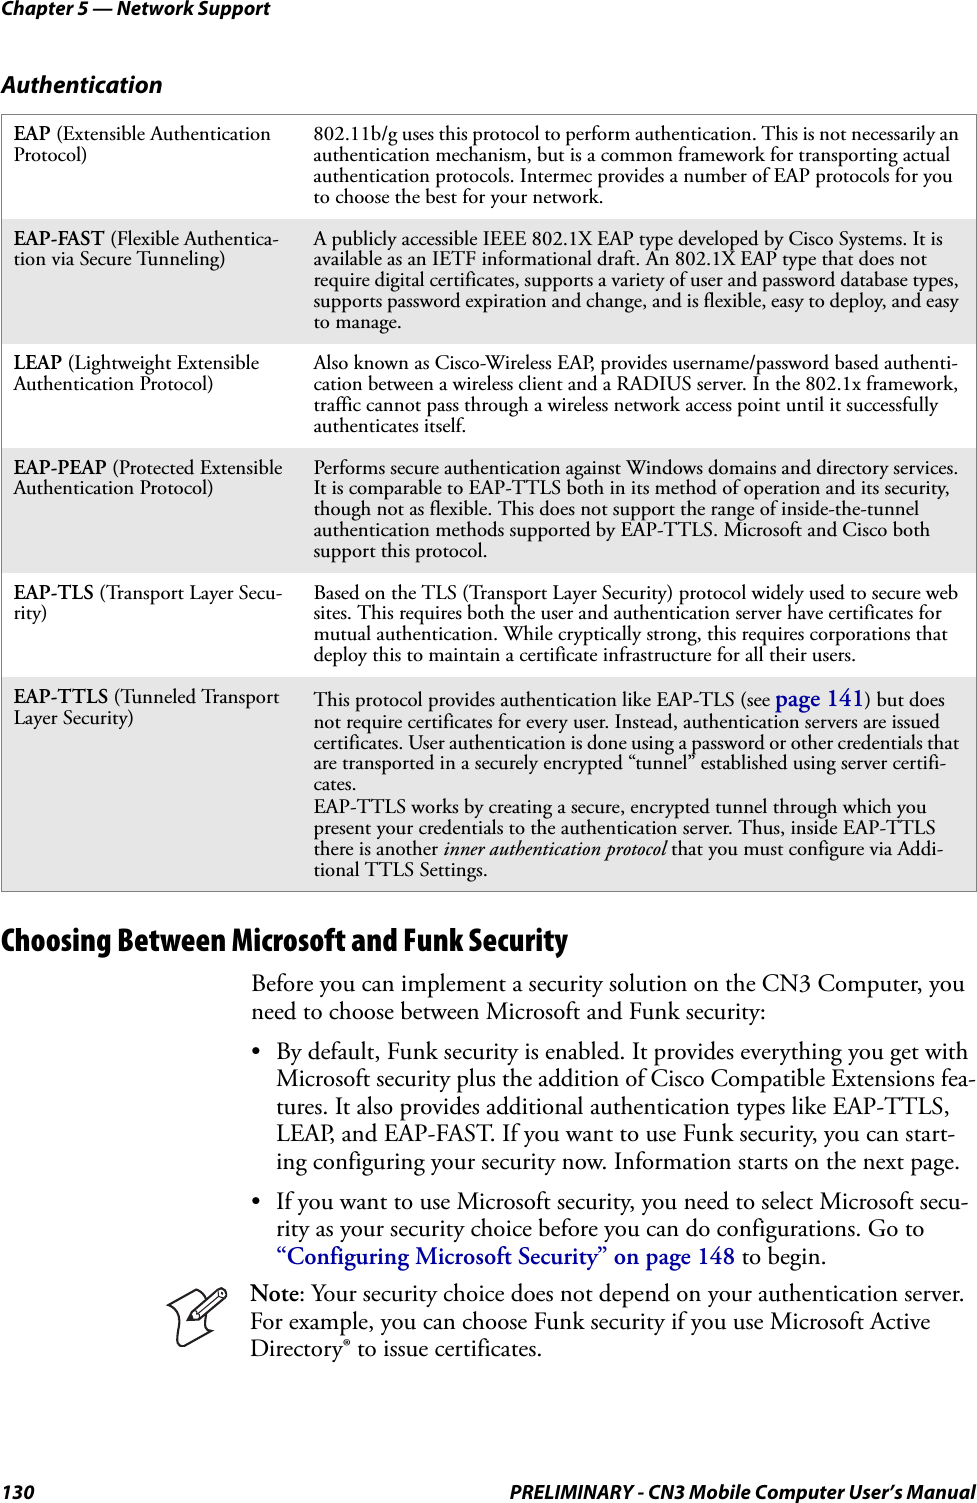 Chapter 5 — Network Support130 PRELIMINARY - CN3 Mobile Computer User’s ManualChoosing Between Microsoft and Funk SecurityBefore you can implement a security solution on the CN3 Computer, you need to choose between Microsoft and Funk security:• By default, Funk security is enabled. It provides everything you get with Microsoft security plus the addition of Cisco Compatible Extensions fea-tures. It also provides additional authentication types like EAP-TTLS, LEAP, and EAP-FAST. If you want to use Funk security, you can start-ing configuring your security now. Information starts on the next page.• If you want to use Microsoft security, you need to select Microsoft secu-rity as your security choice before you can do configurations. Go to “Configuring Microsoft Security” on page 148 to begin.AuthenticationEAP (Extensible Authentication Protocol)802.11b/g uses this protocol to perform authentication. This is not necessarily an authentication mechanism, but is a common framework for transporting actual authentication protocols. Intermec provides a number of EAP protocols for you to choose the best for your network.EAP-FAST (Flexible Authentica-tion via Secure Tunneling)A publicly accessible IEEE 802.1X EAP type developed by Cisco Systems. It is available as an IETF informational draft. An 802.1X EAP type that does not require digital certificates, supports a variety of user and password database types, supports password expiration and change, and is flexible, easy to deploy, and easy to manage.LEAP (Lightweight Extensible Authentication Protocol)Also known as Cisco-Wireless EAP, provides username/password based authenti-cation between a wireless client and a RADIUS server. In the 802.1x framework, traffic cannot pass through a wireless network access point until it successfully authenticates itself.EAP-PEAP (Protected Extensible Authentication Protocol)Performs secure authentication against Windows domains and directory services. It is comparable to EAP-TTLS both in its method of operation and its security, though not as flexible. This does not support the range of inside-the-tunnel authentication methods supported by EAP-TTLS. Microsoft and Cisco both support this protocol.EAP-TLS (Transport Layer Secu-rity)Based on the TLS (Transport Layer Security) protocol widely used to secure web sites. This requires both the user and authentication server have certificates for mutual authentication. While cryptically strong, this requires corporations that deploy this to maintain a certificate infrastructure for all their users.EAP-TTLS (Tunneled Transport Layer Security) This protocol provides authentication like EAP-TLS (see page 141) but does not require certificates for every user. Instead, authentication servers are issued certificates. User authentication is done using a password or other credentials that are transported in a securely encrypted “tunnel” established using server certifi-cates.EAP-TTLS works by creating a secure, encrypted tunnel through which you present your credentials to the authentication server. Thus, inside EAP-TTLS there is another inner authentication protocol that you must configure via Addi-tional TTLS Settings.Note: Your security choice does not depend on your authentication server. For example, you can choose Funk security if you use Microsoft Active Directory® to issue certificates.